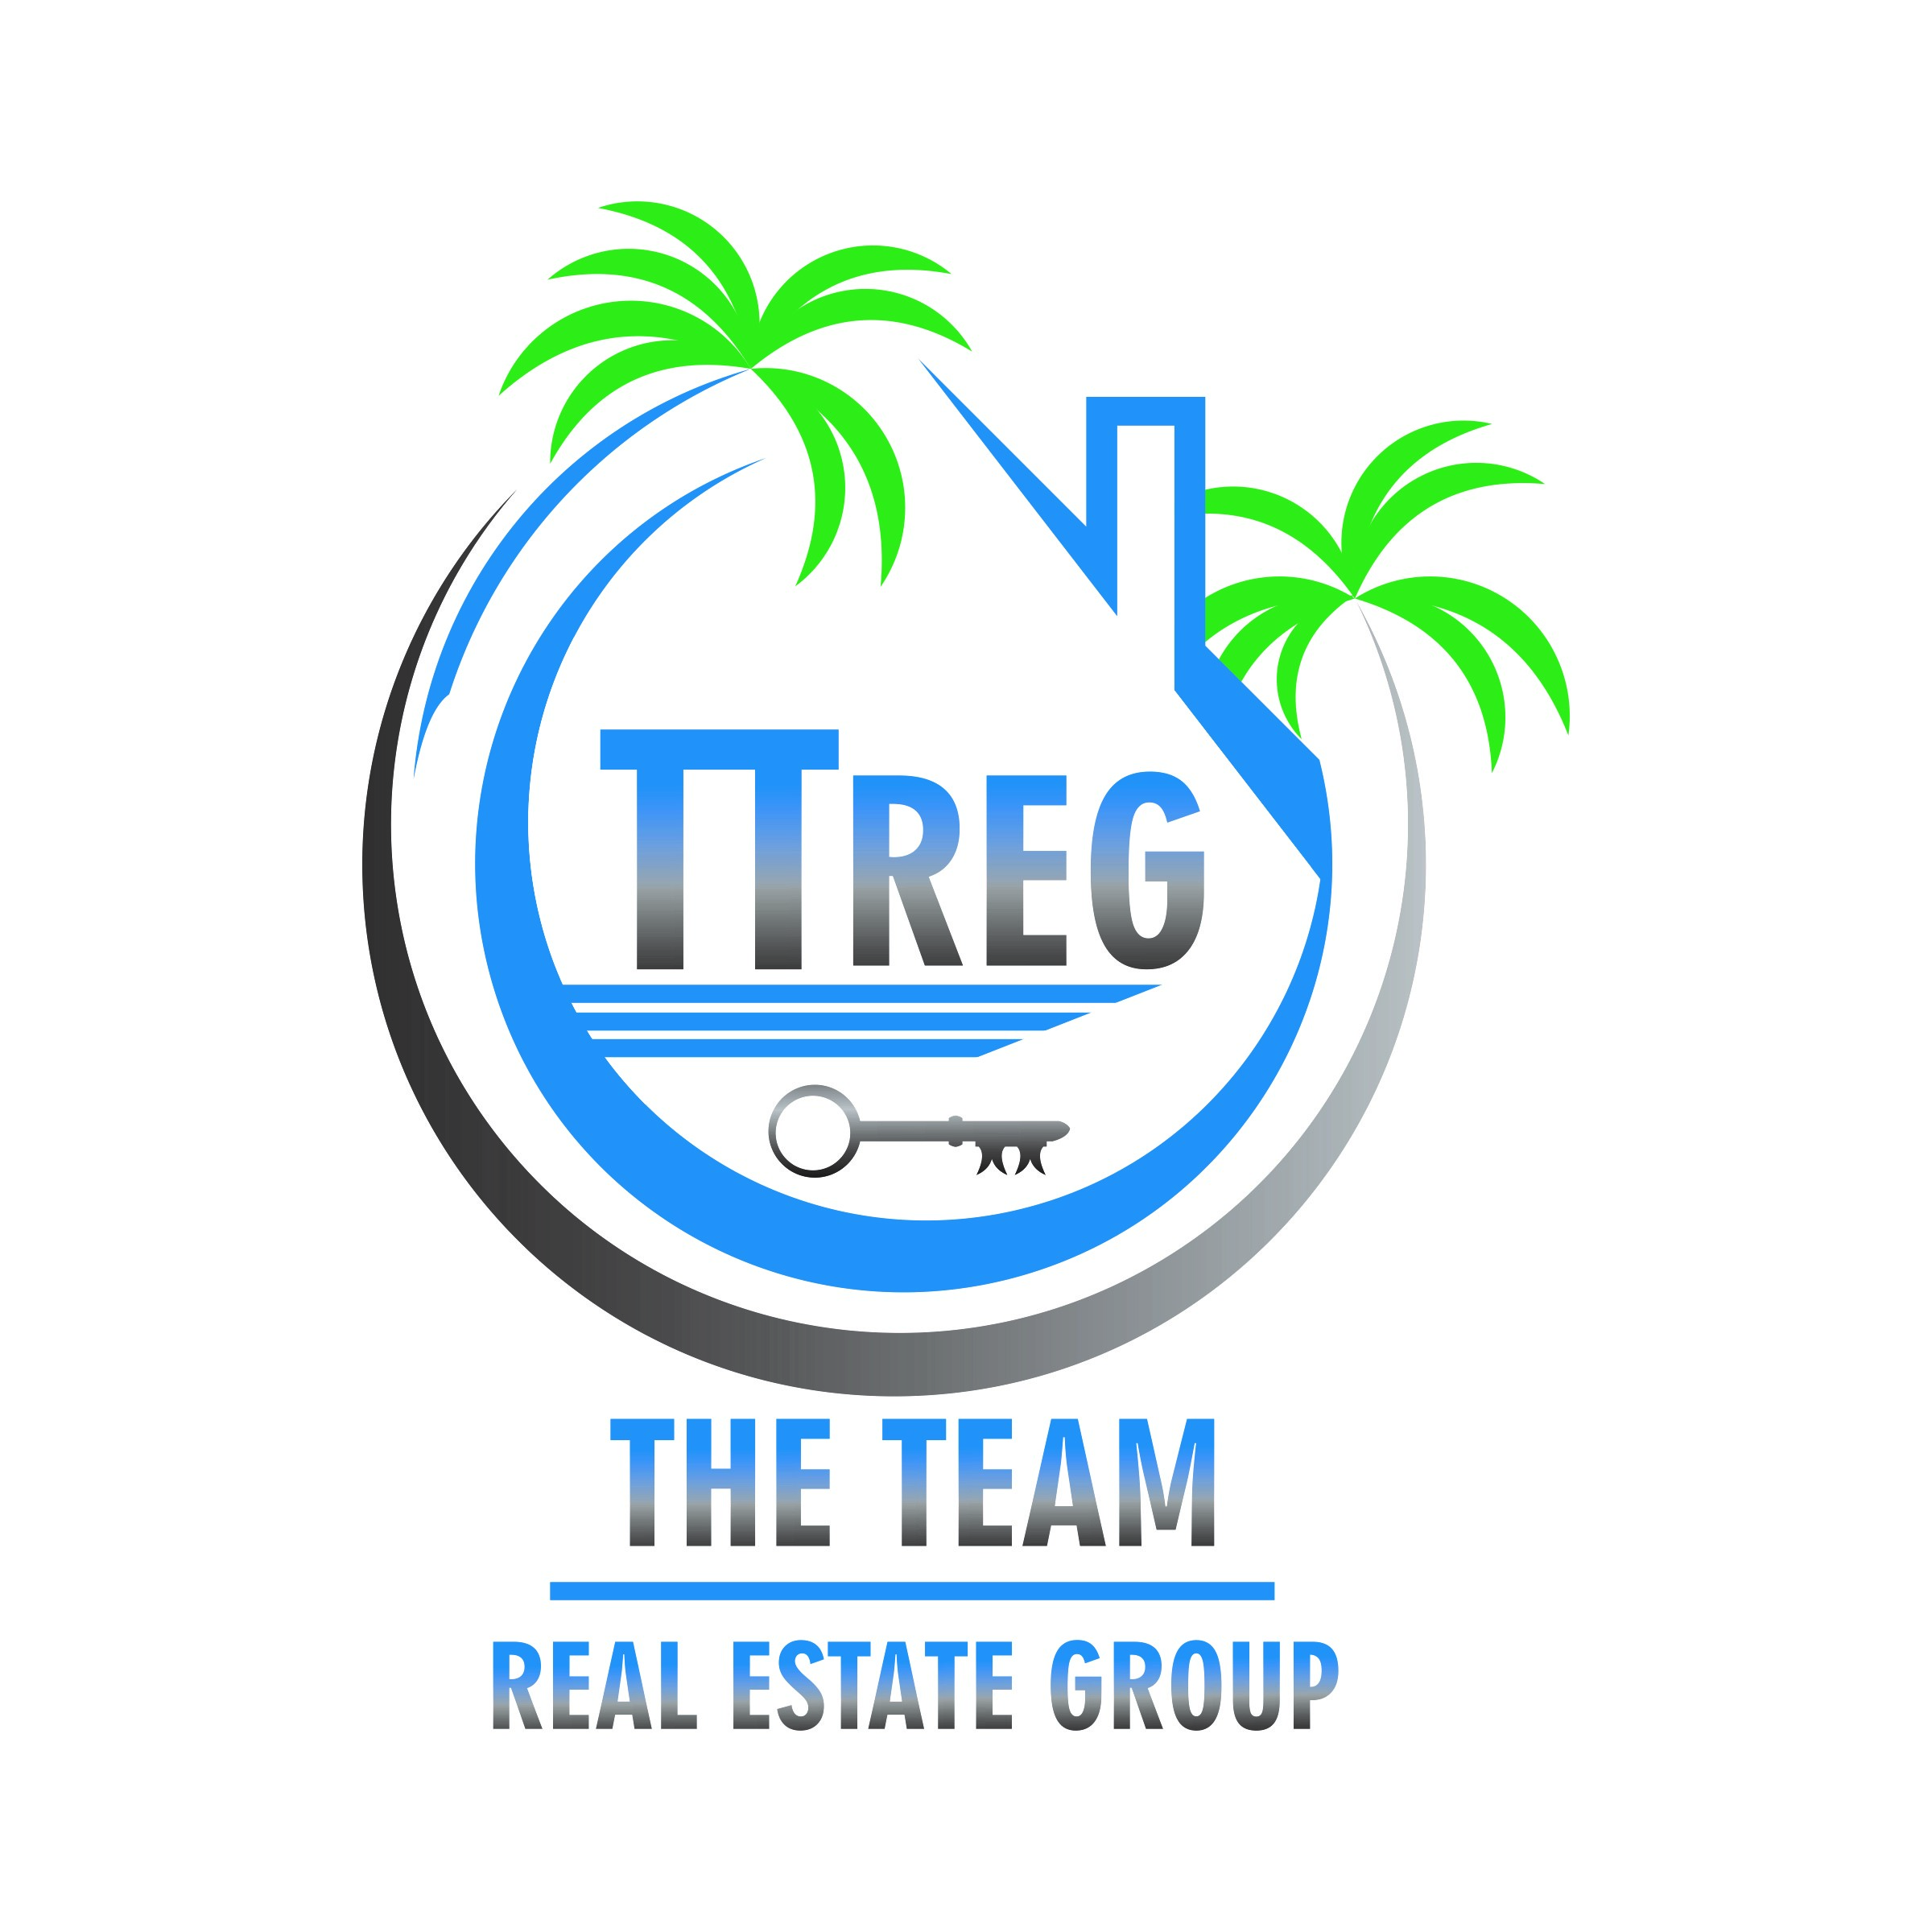 THE TEAM REAL ESTATE GROUP